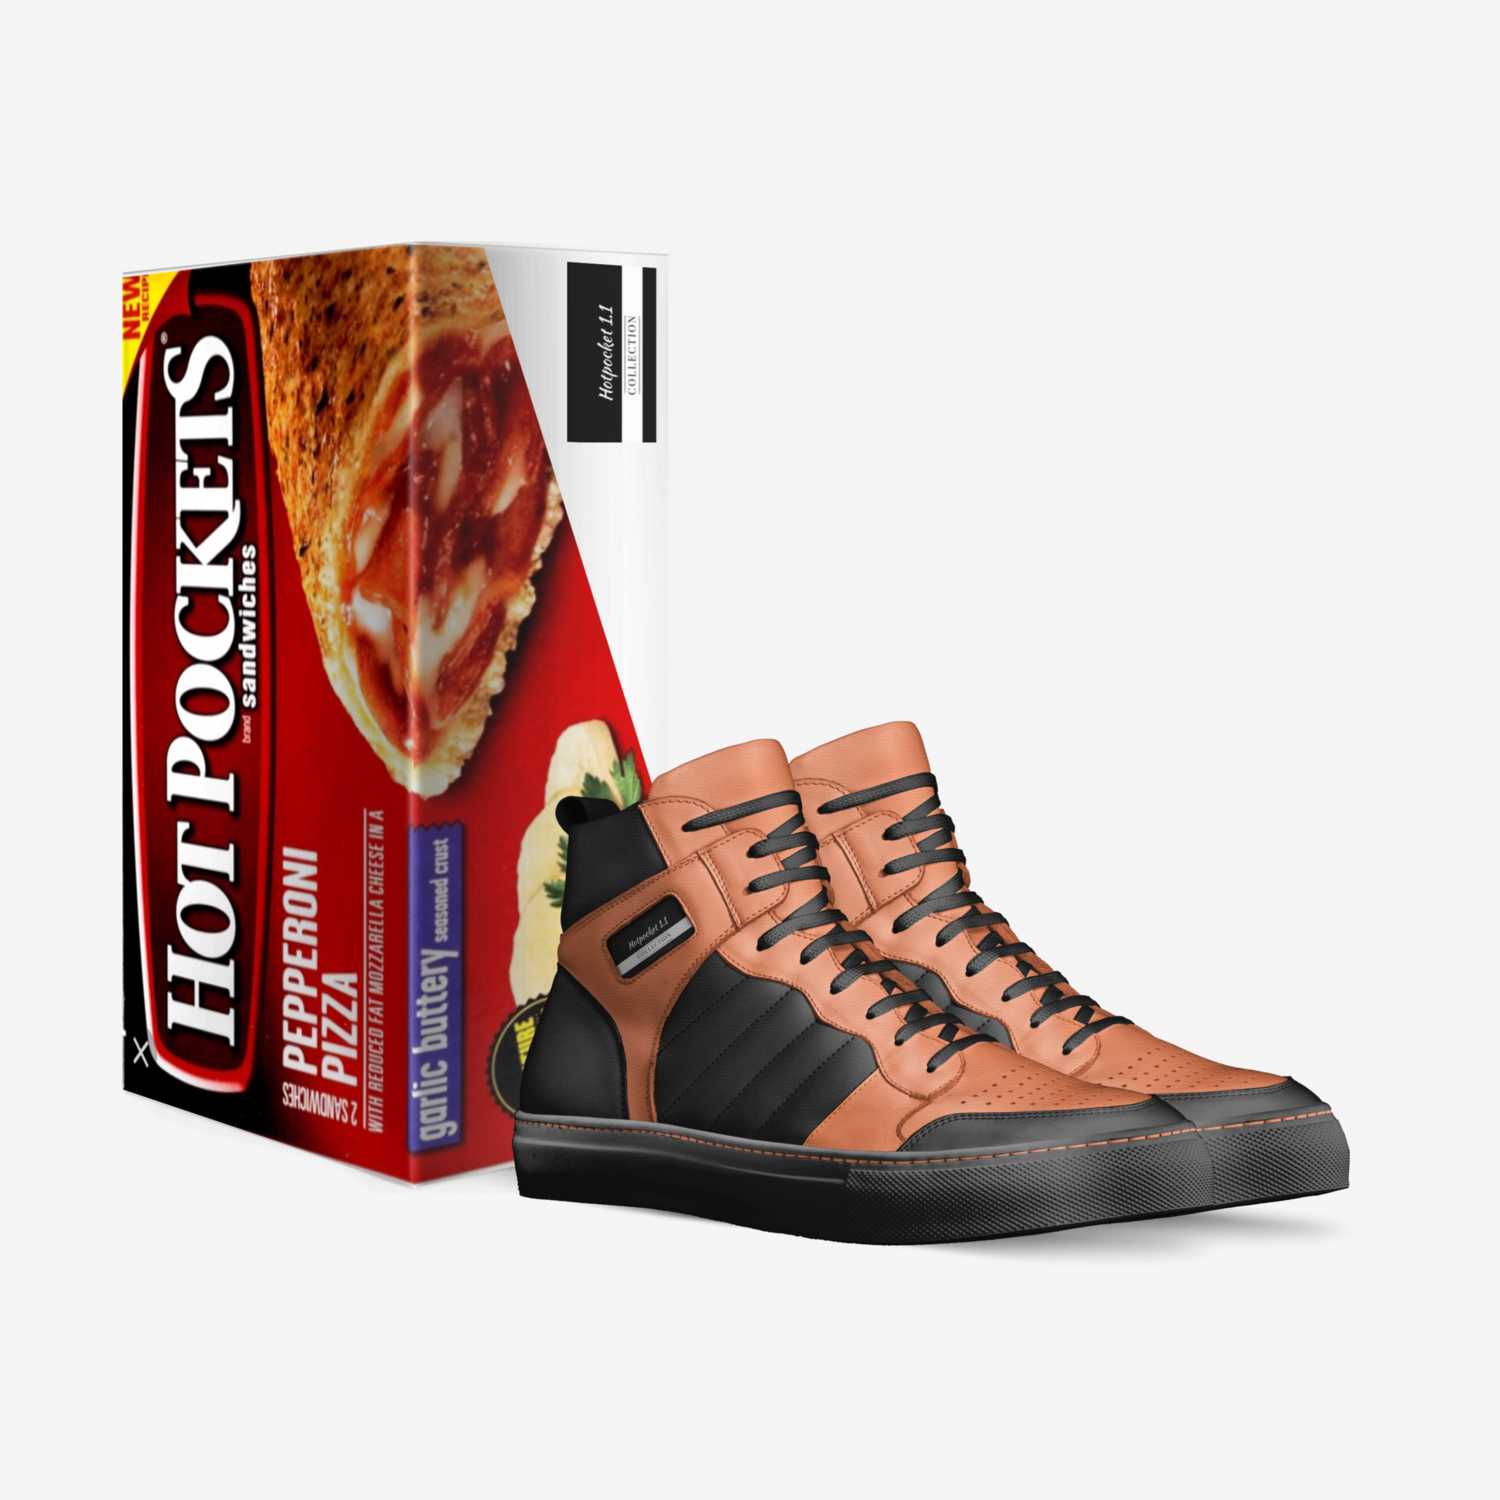 Hotpocket 1.1 custom made in Italy shoes by Justin Rodriguez | Box view